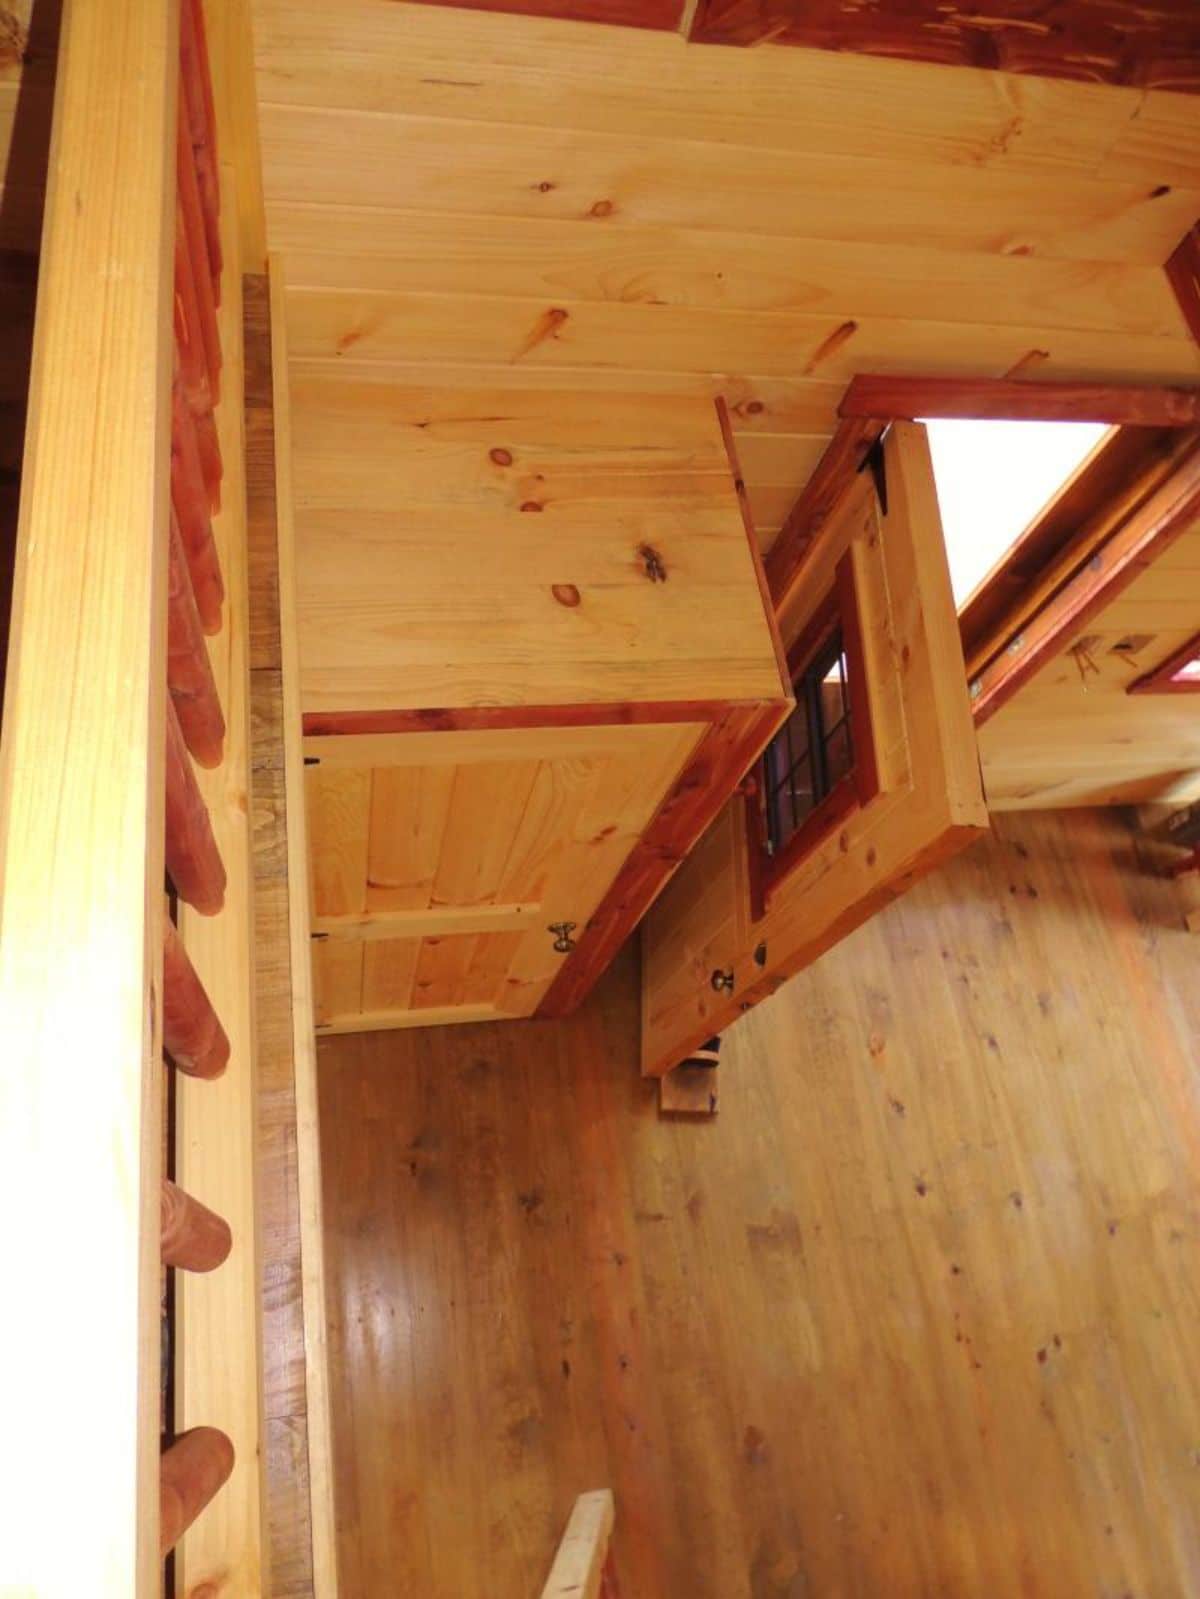 view down into main floor of log cabin by front door that is open with cabinet to left of image